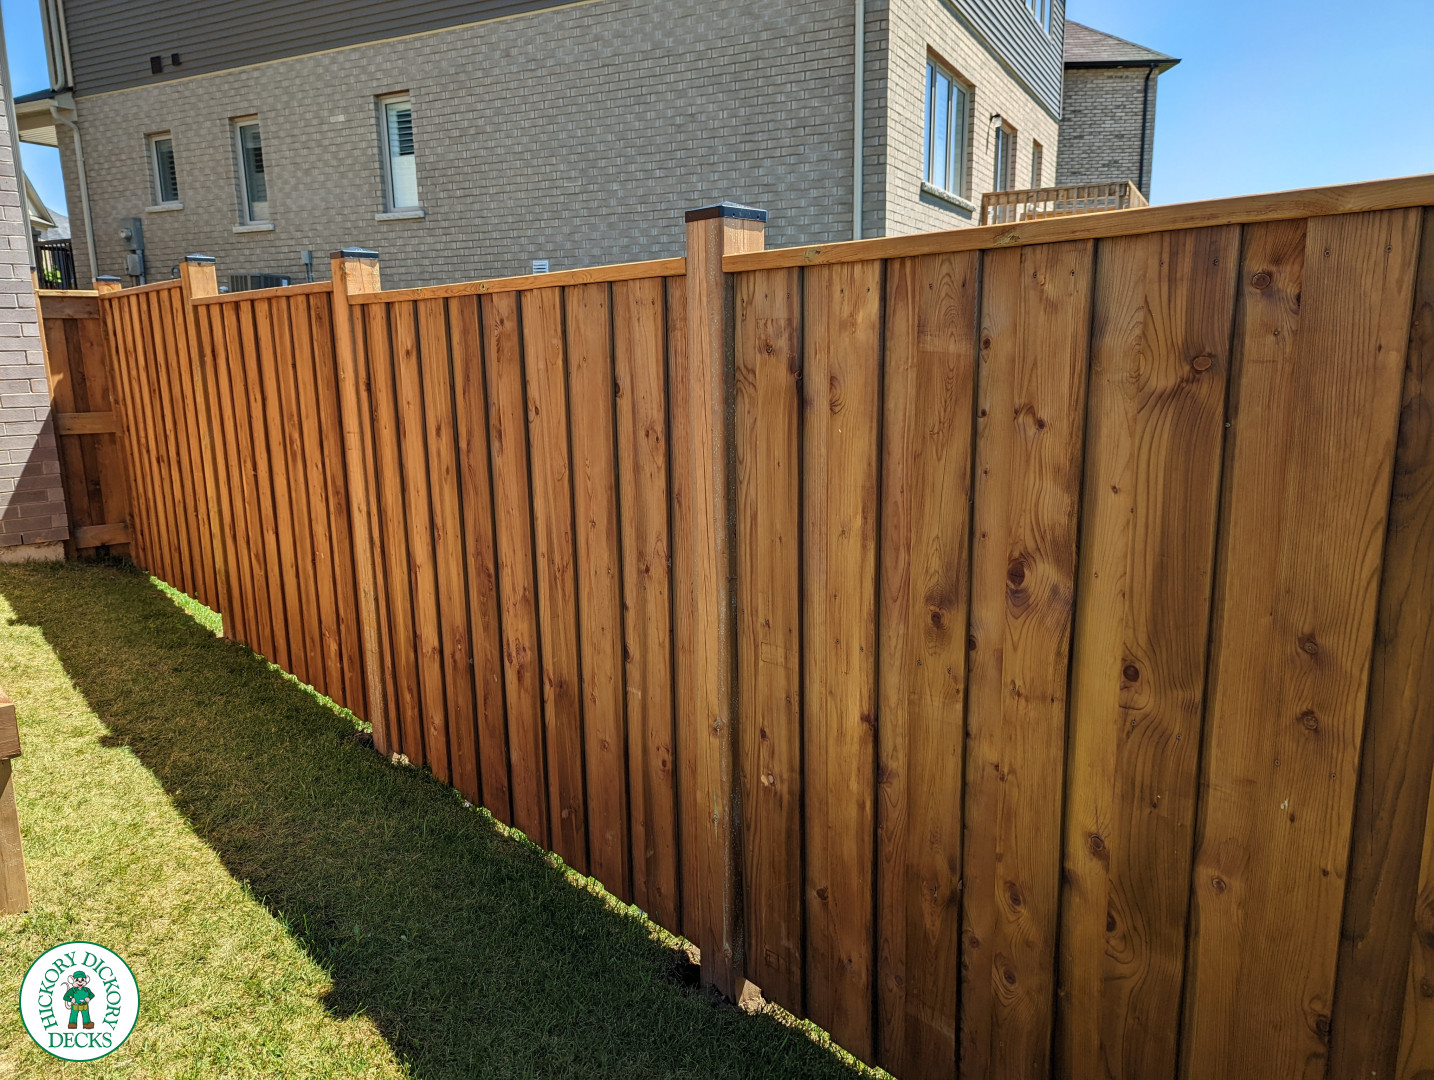 Pressure treated deck with pressure treated privacy screens and fence.